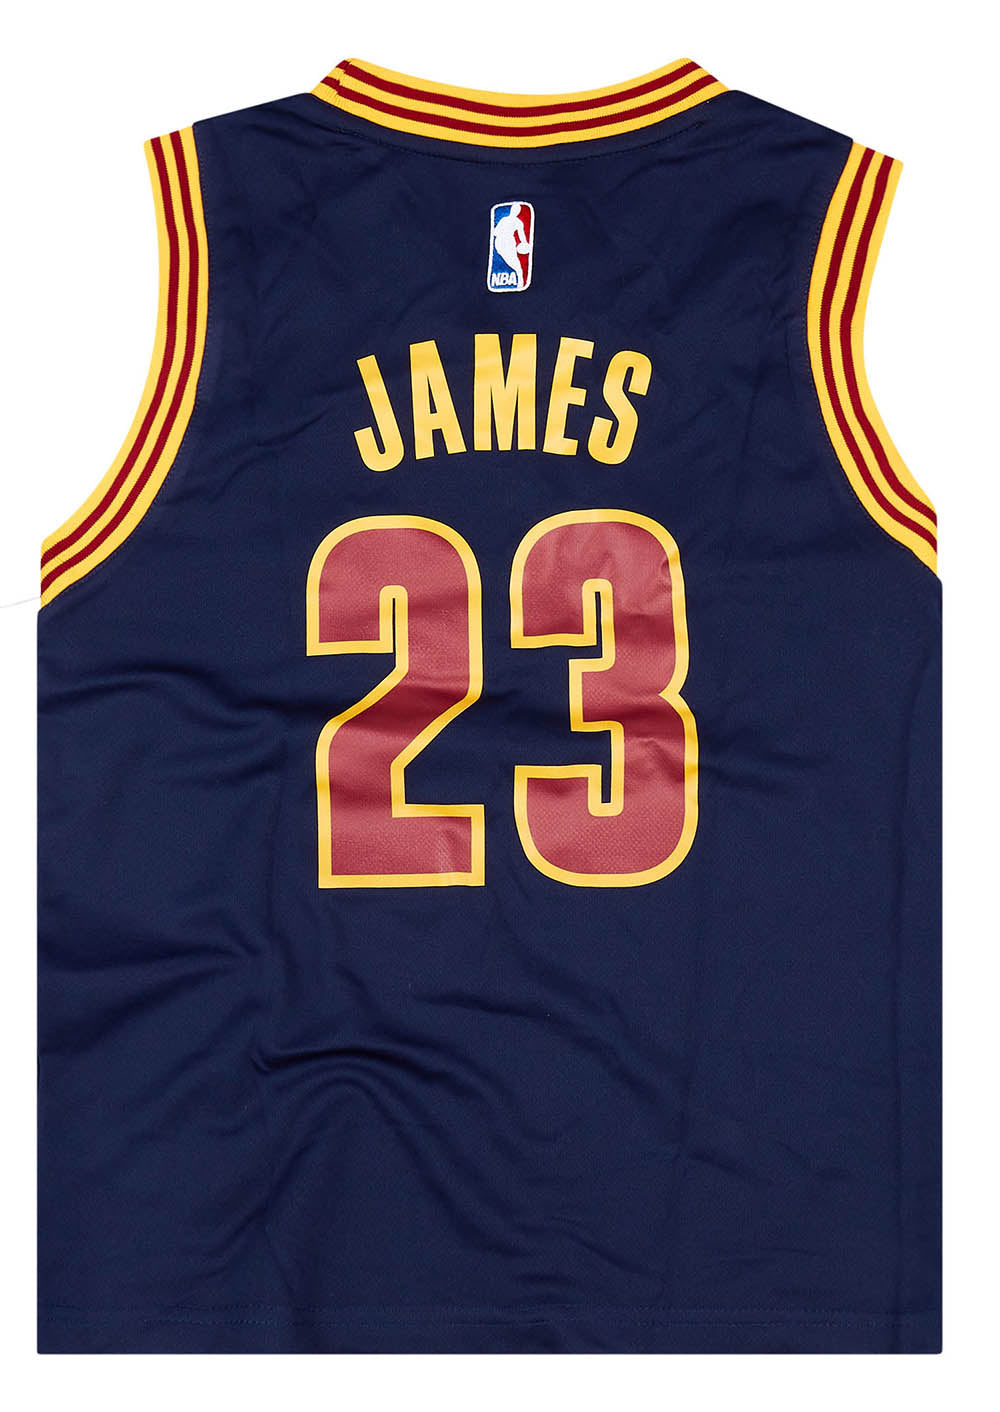 2014-17 CLEVELAND CAVALIERS JAMES #23 ADIDAS JERSEY (ALTERNATE) Y - W/TAGS